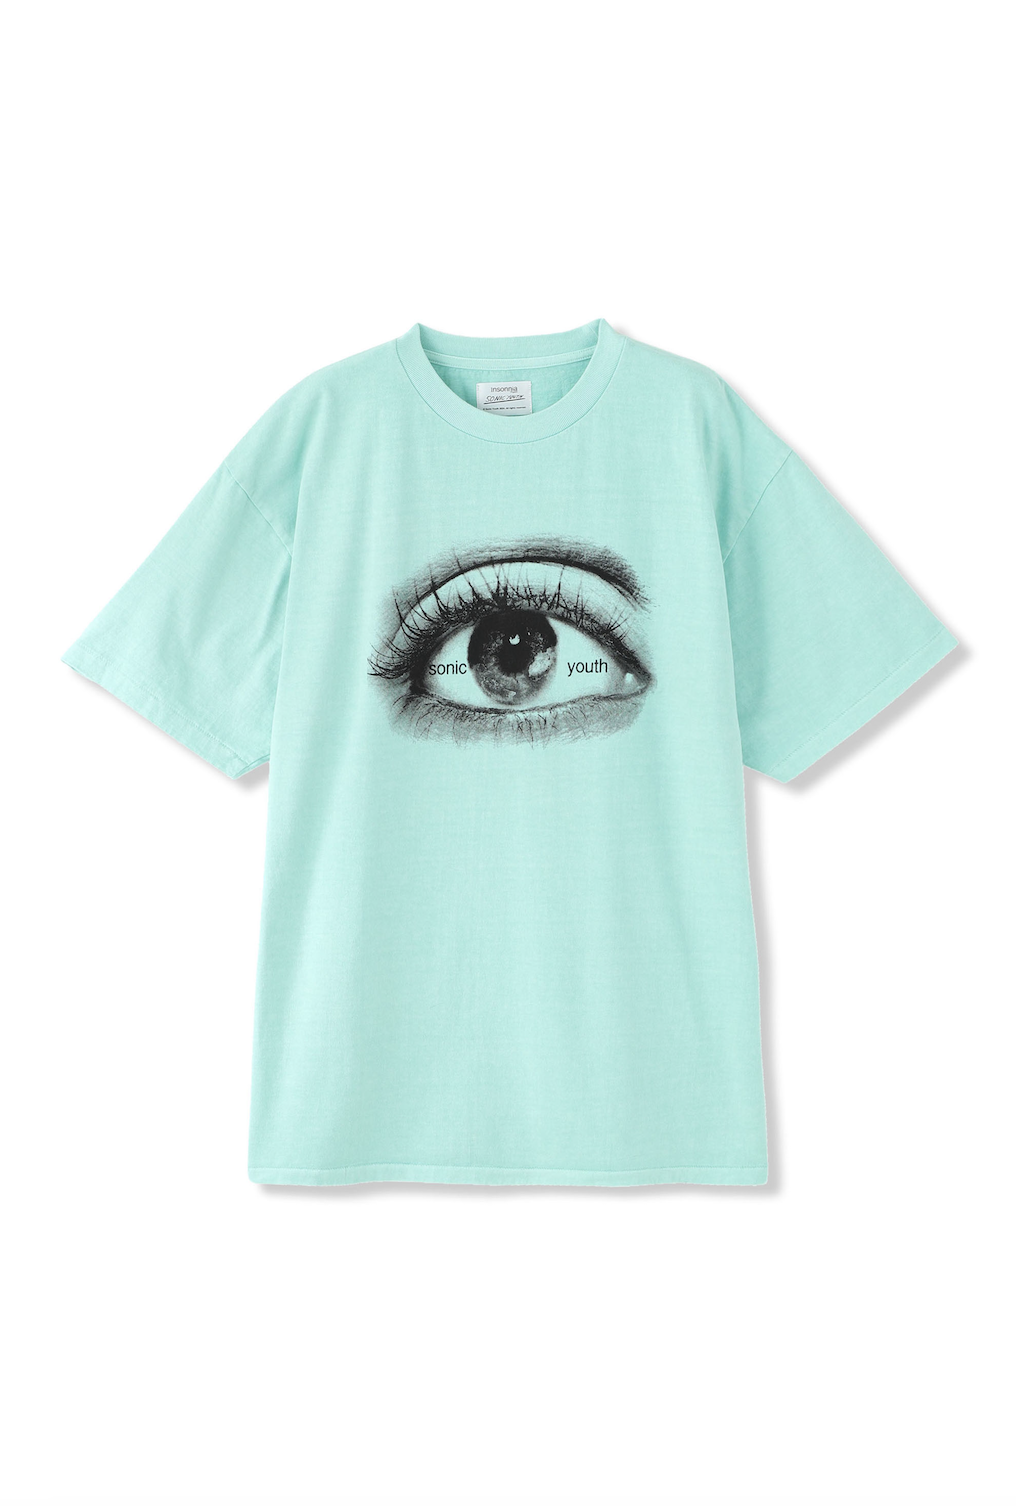 Insonnia Projects・SONIC YOUTH EYE TEE